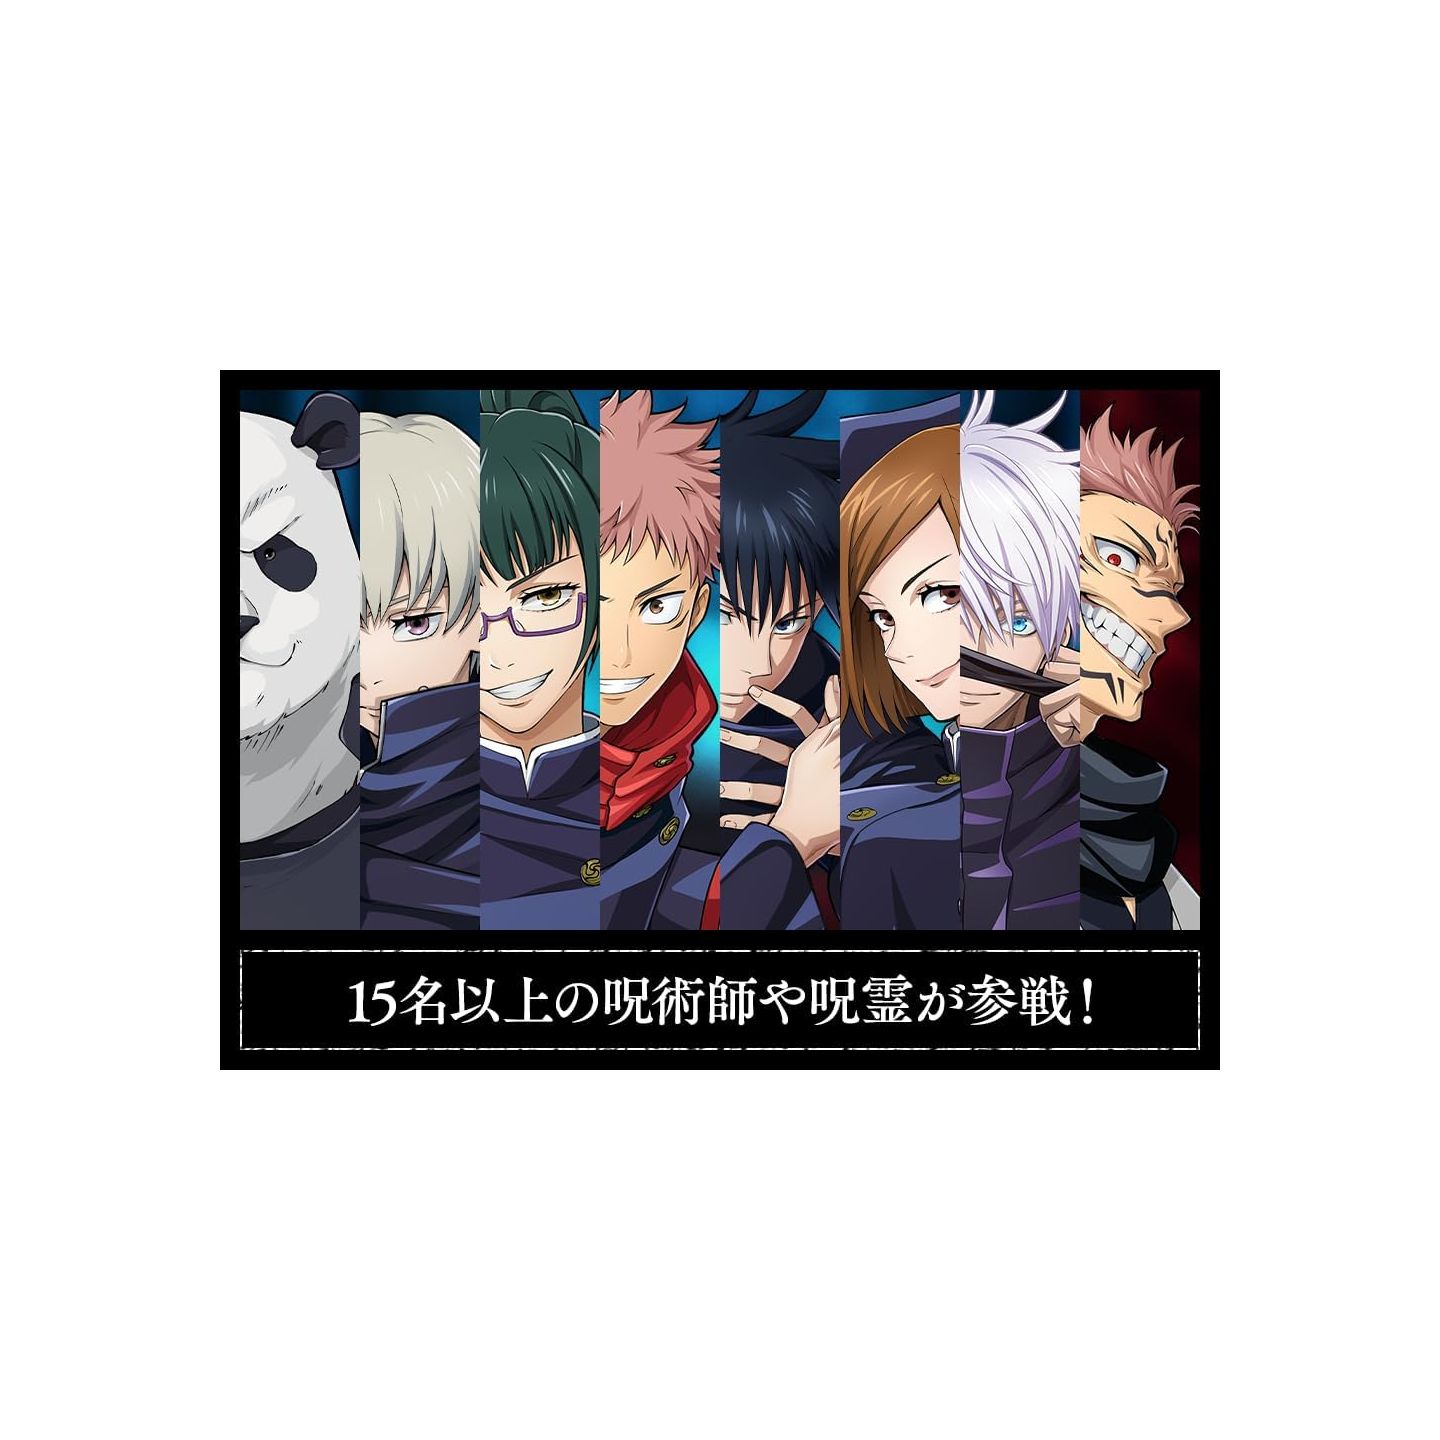 Jujutsu Kaisen Cursed Clash Collector's Edition Switch + Wall Scroll